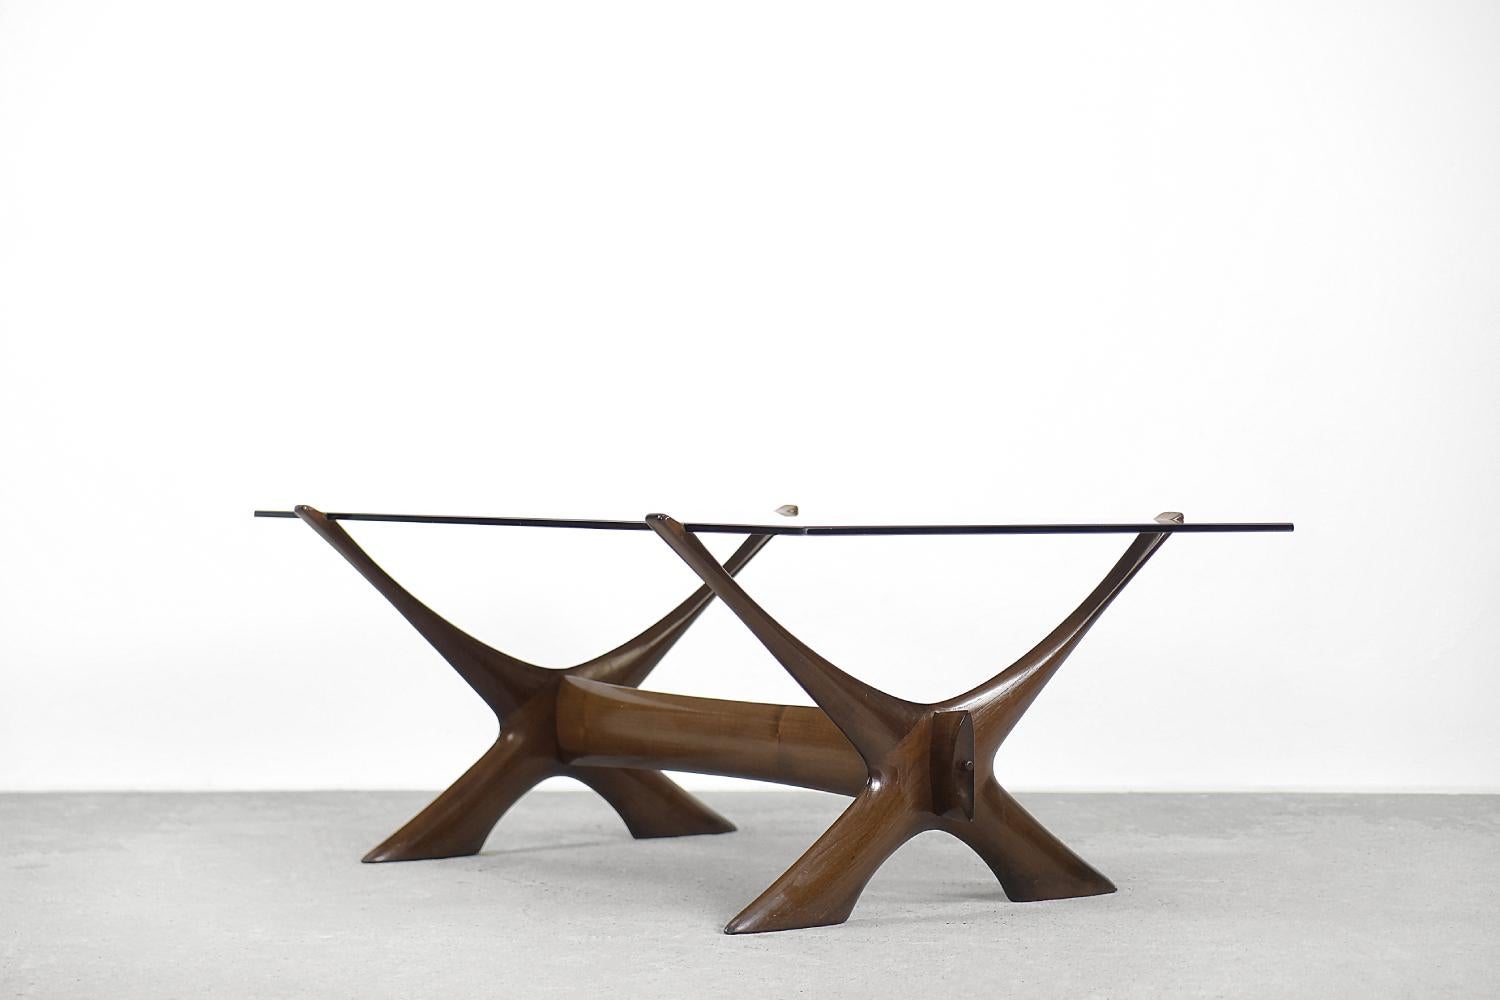 This organically sculptured Condor coffee table was designed by Fredrik Schriever-Abeln and manufactured by Örebro Glass in Sweden during the 1960s. The X-shape base was handcrafted from solid walnut. The distinct frame is contrasted by a linear